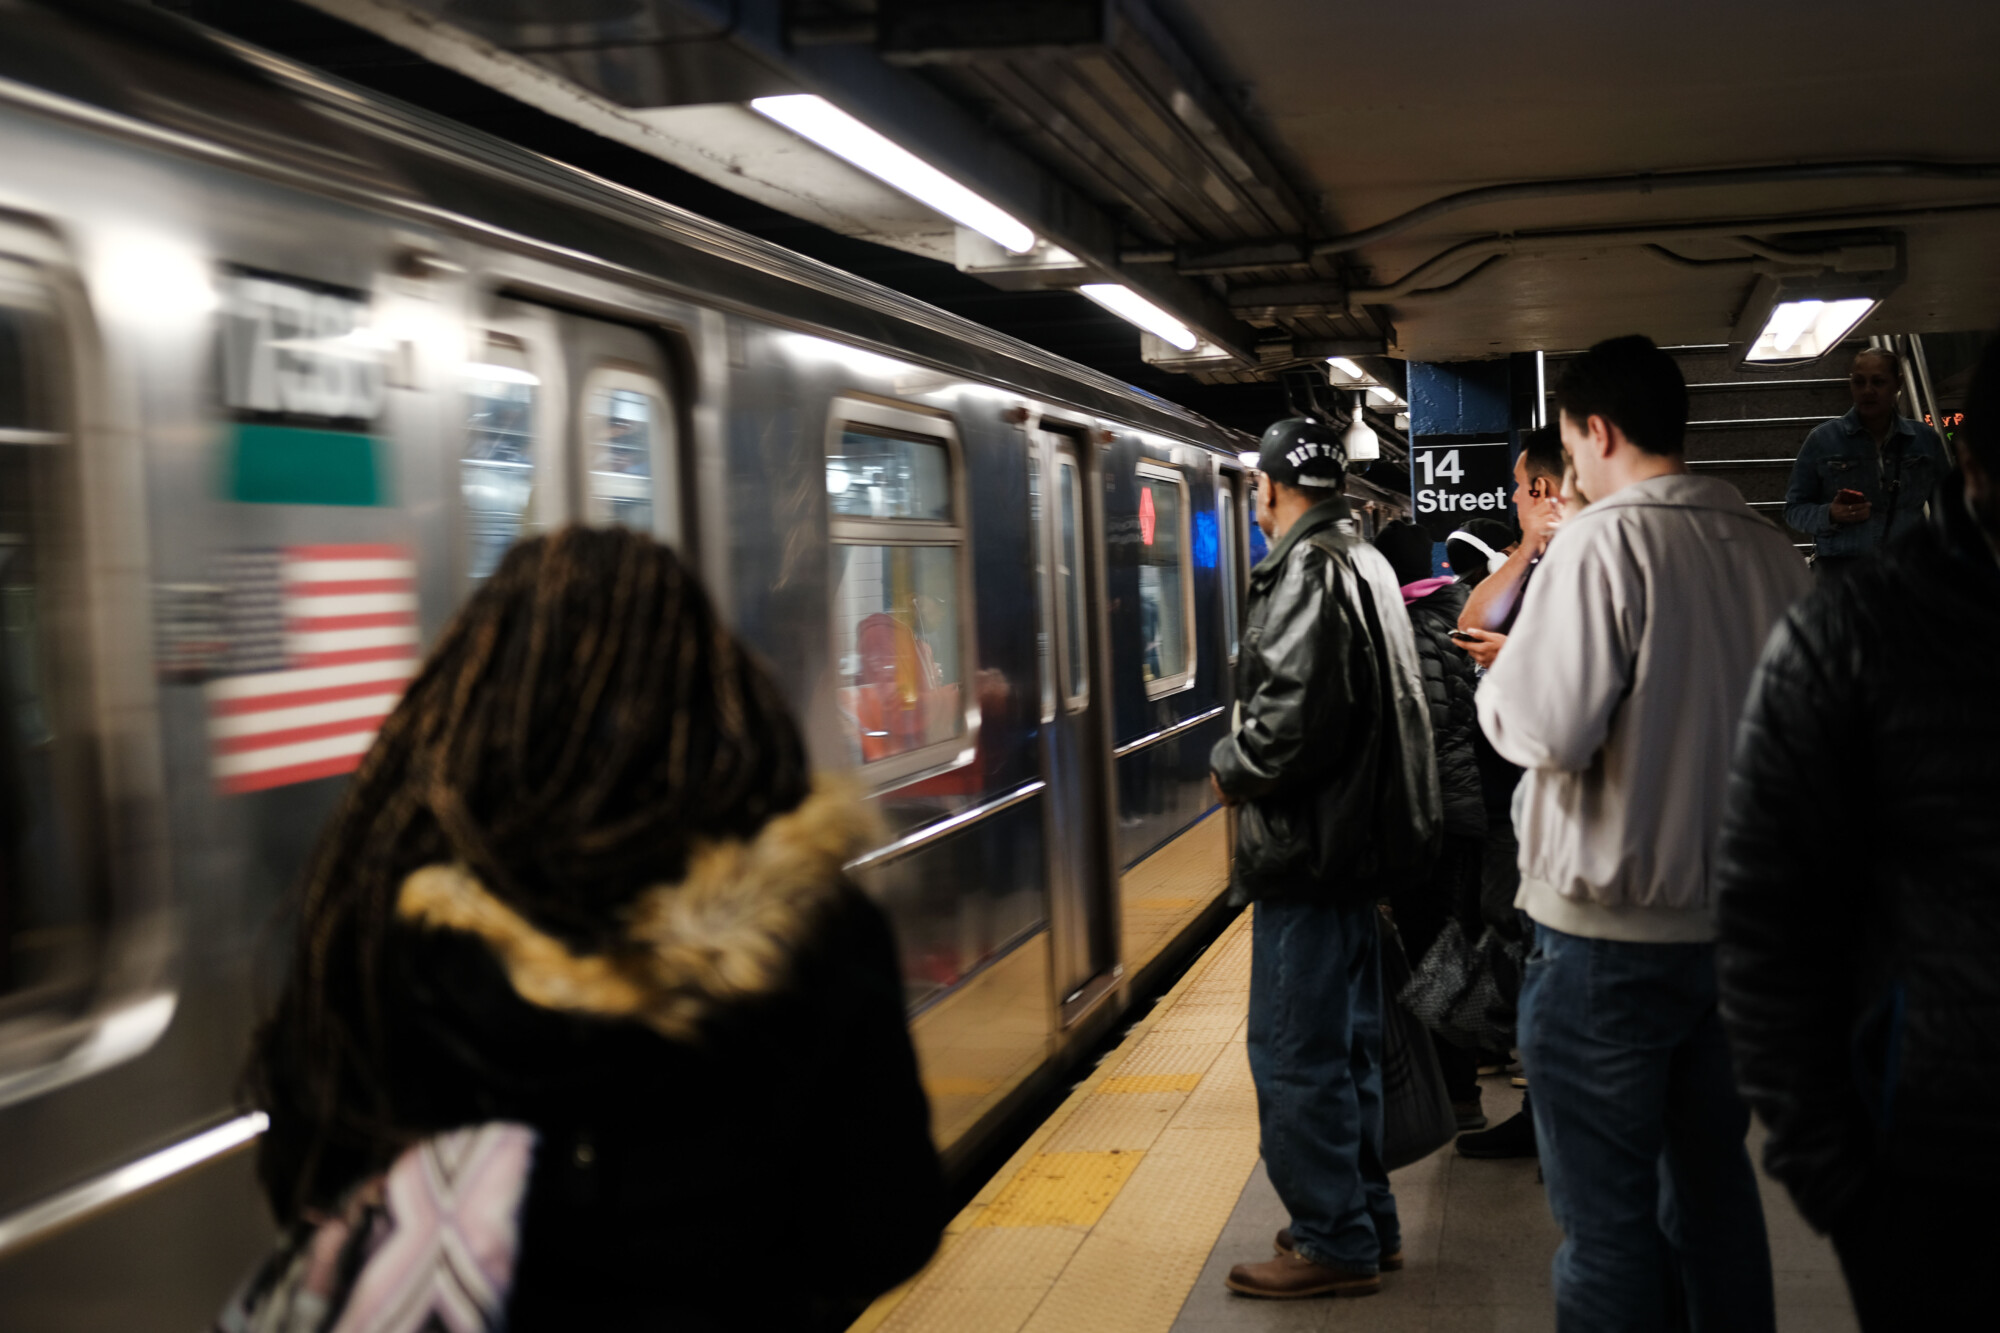 New Yorkers Feel Public Transit Is Not Safe